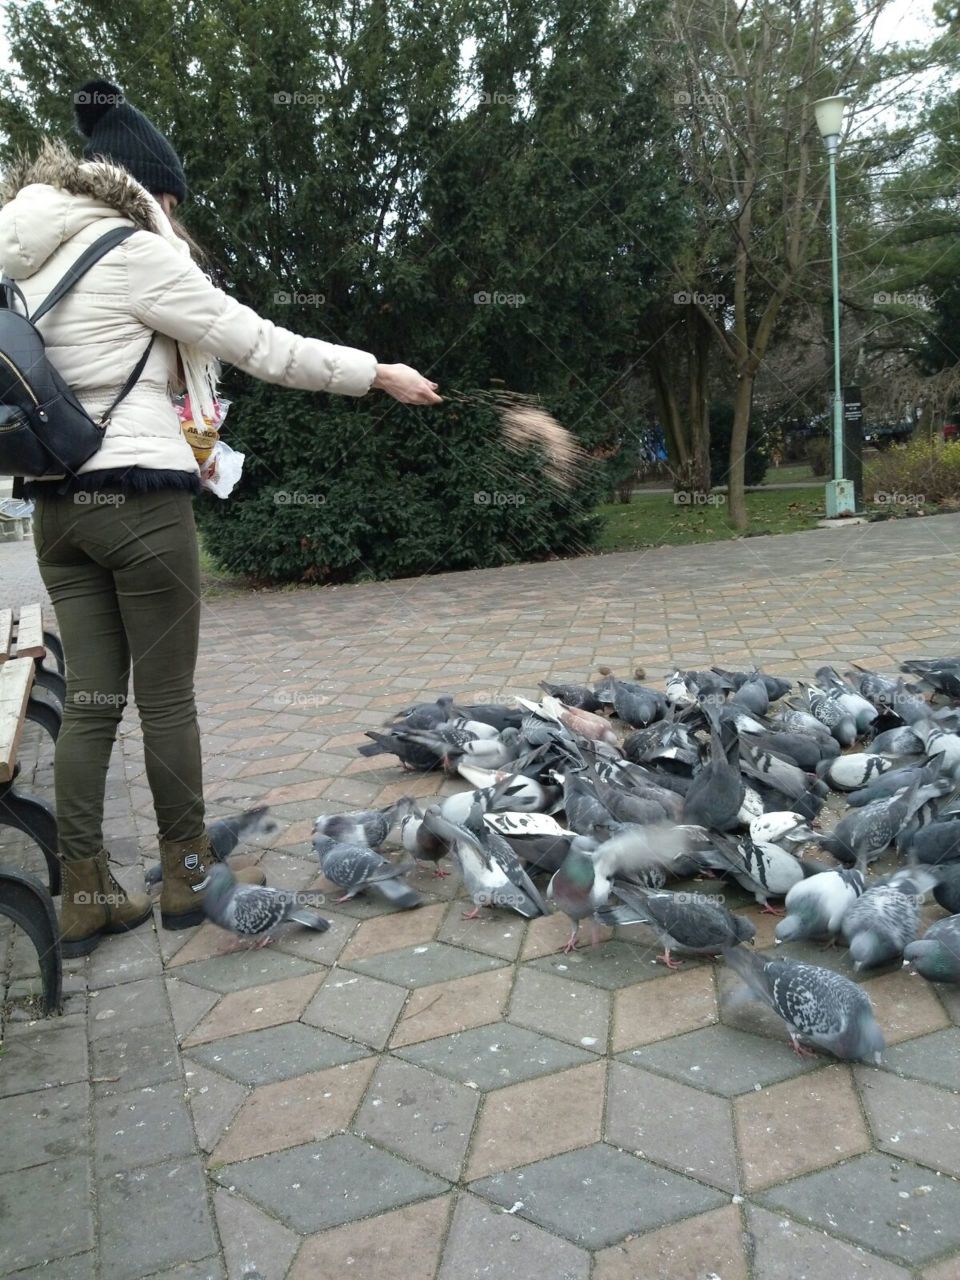 Feeding these little pigeons